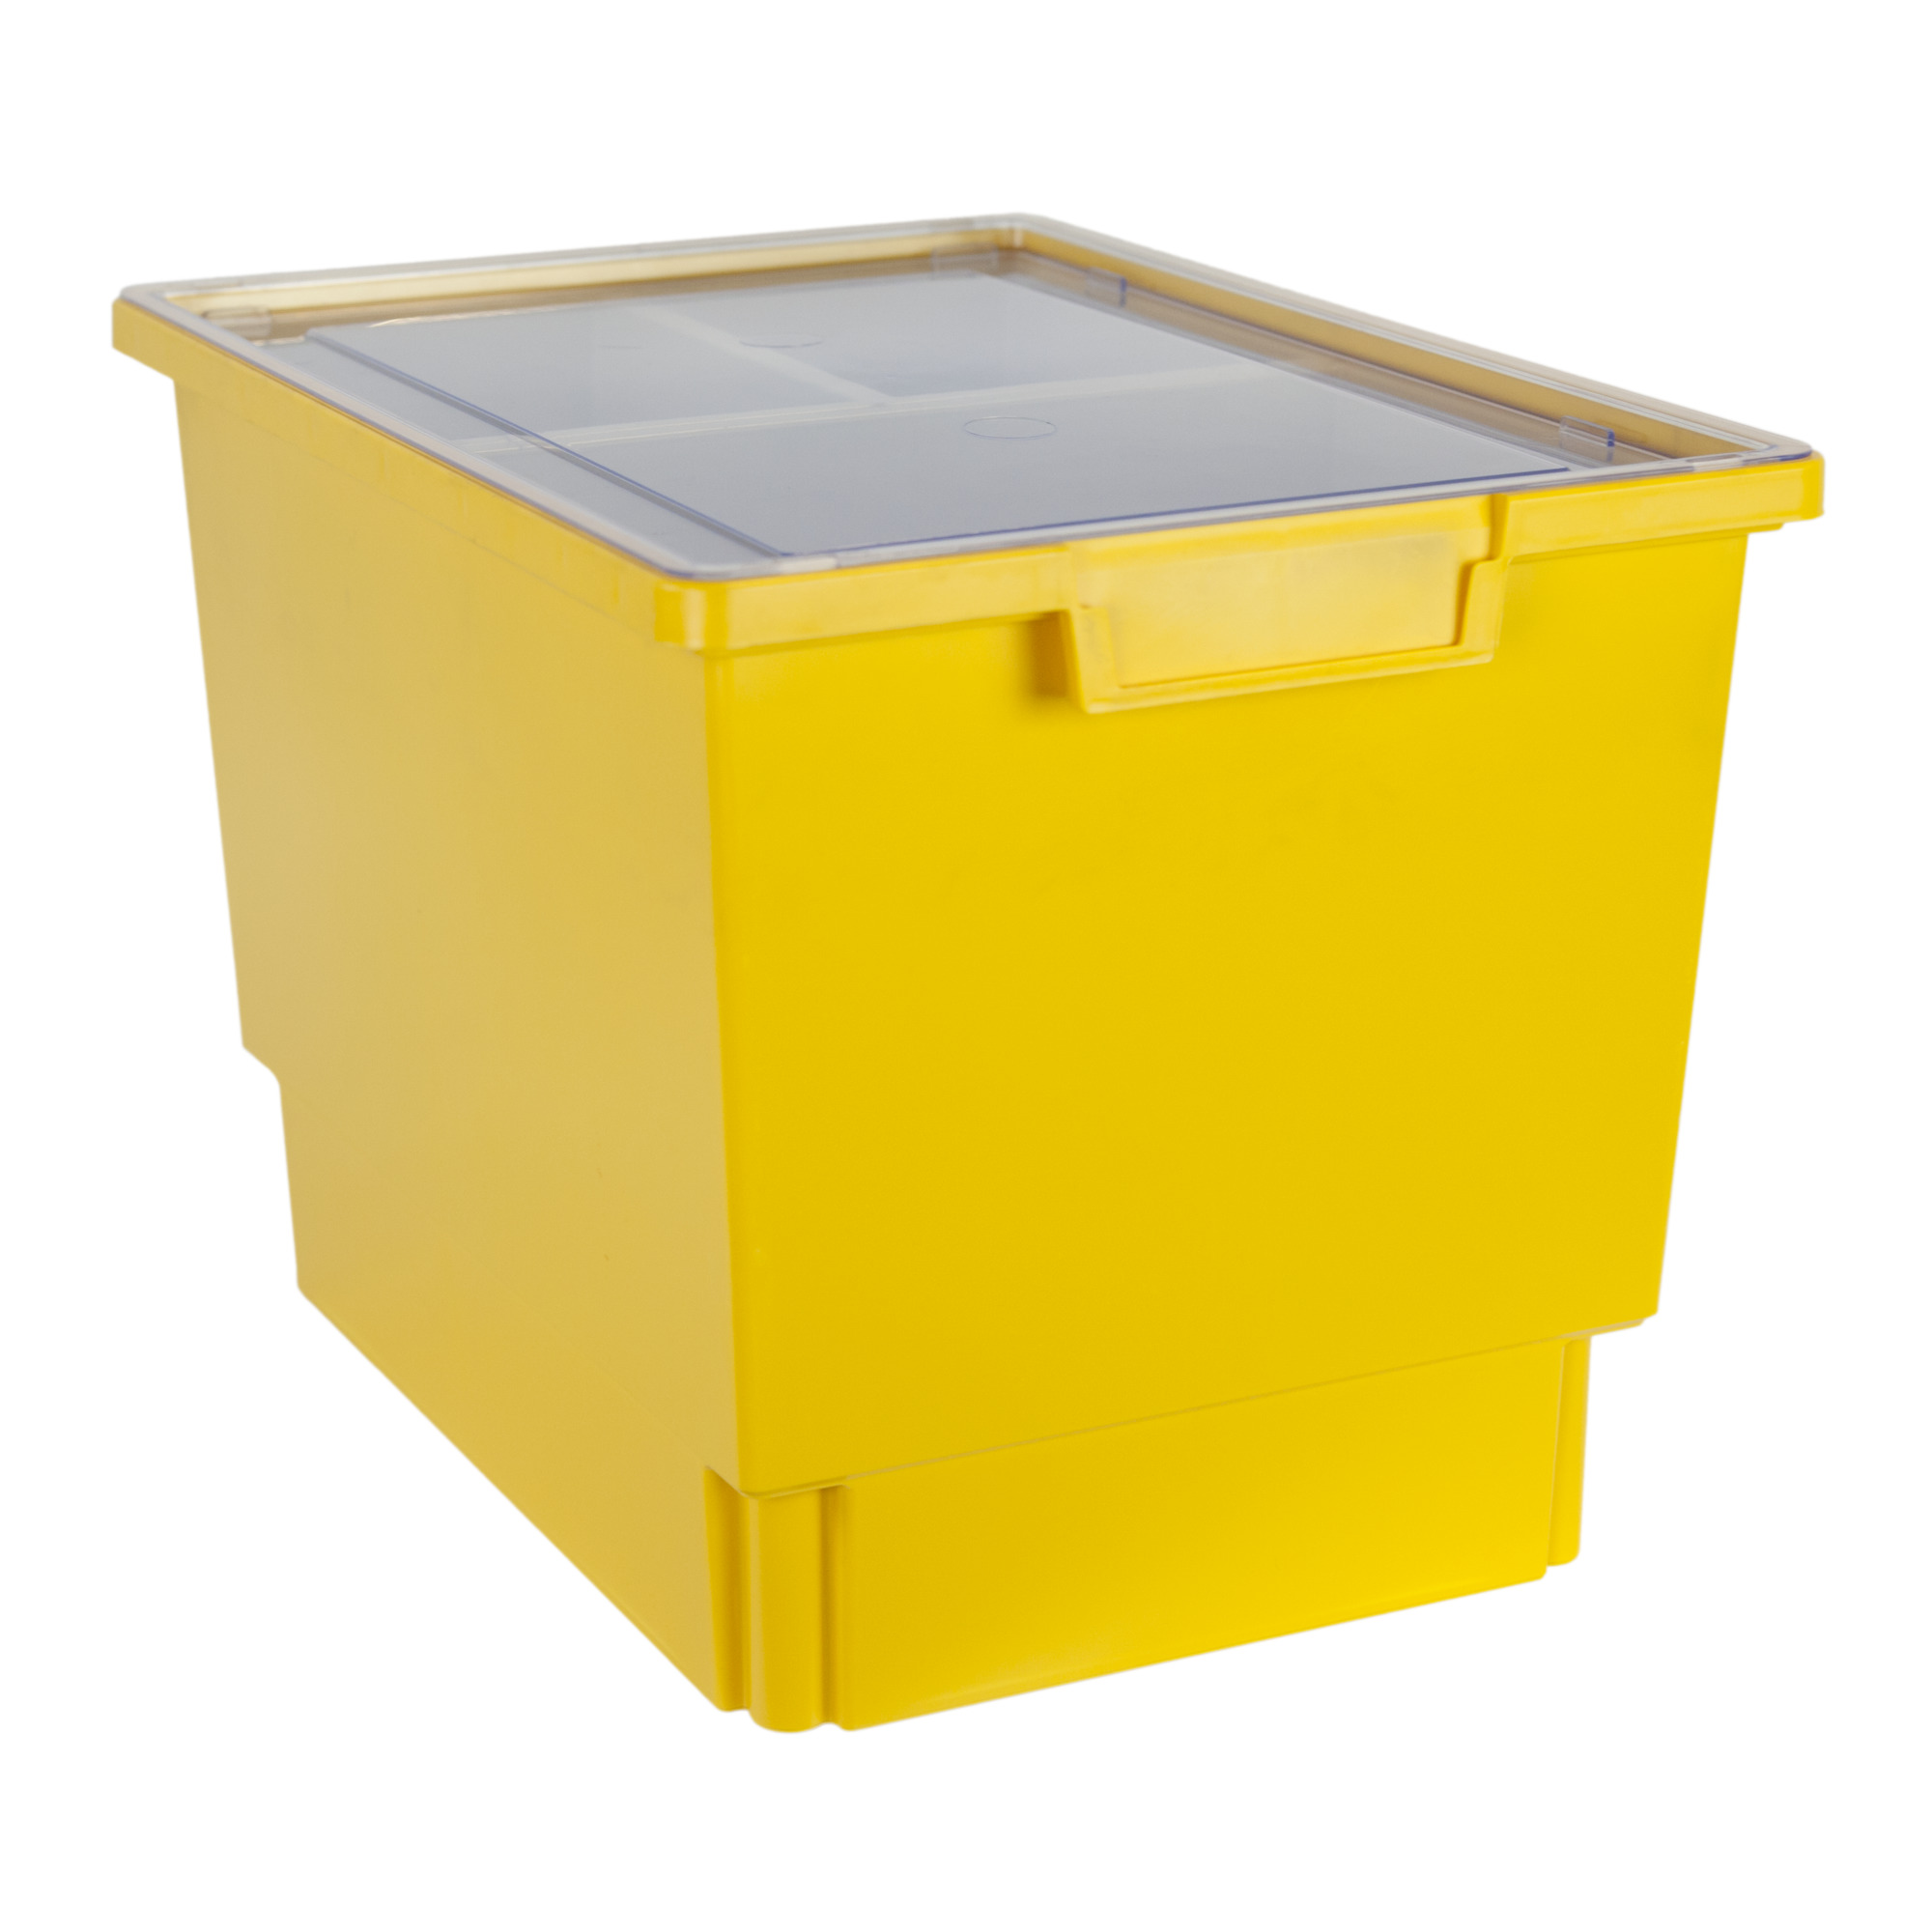 Certwood StorWerks, Slim Line 12Inch Tray Kit (3 x Inserts) Yellow-3PK, Included (qty.) 3, Material Plastic, Height 12 in, Model CE1954PY-NK0004-3